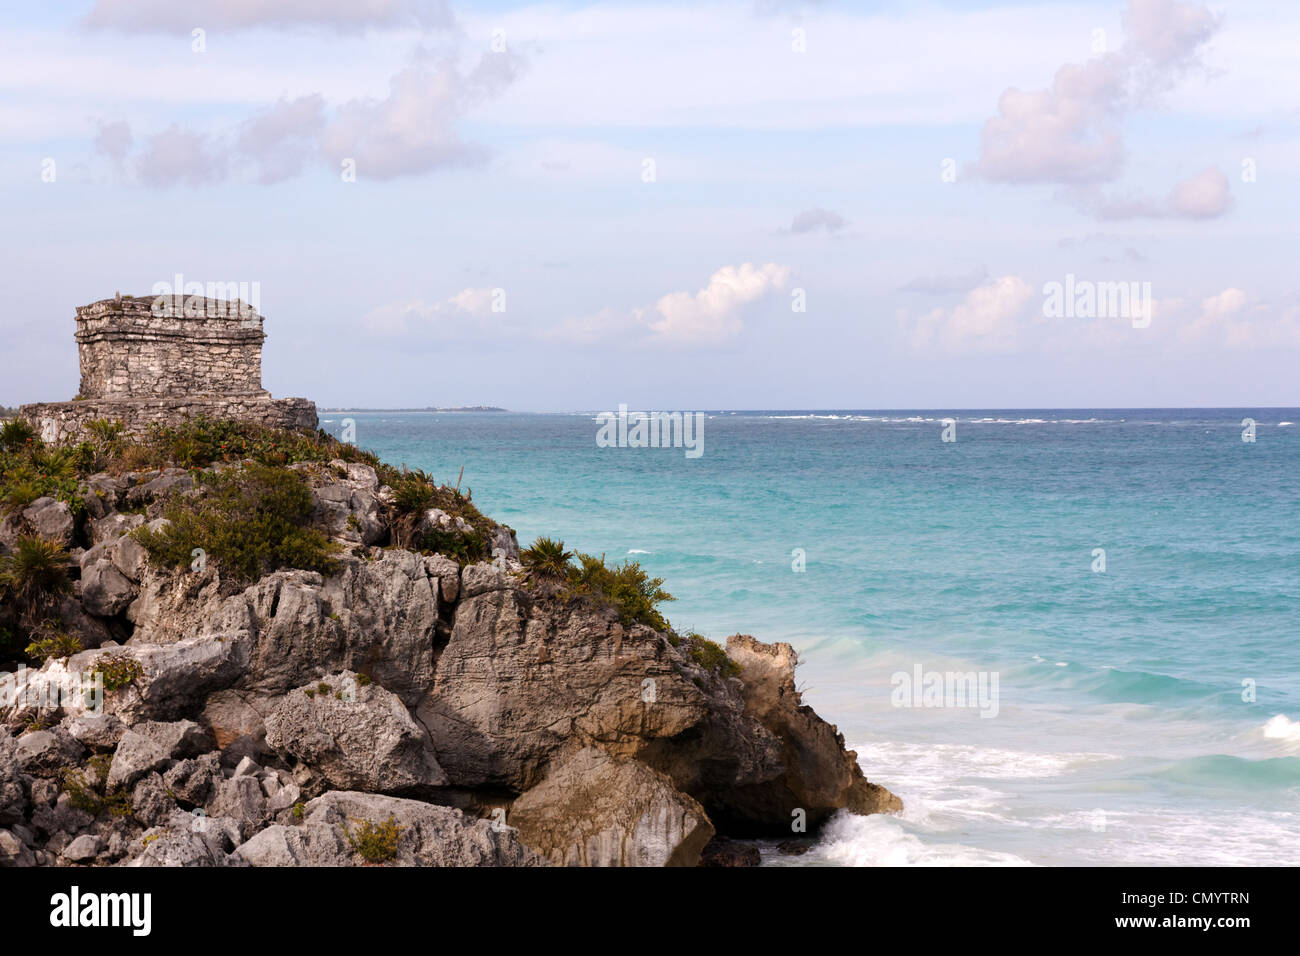 Remains of a Mayan tower overlooking the ocean at Tulum, Quintana Roo, Mexico. Stock Photo